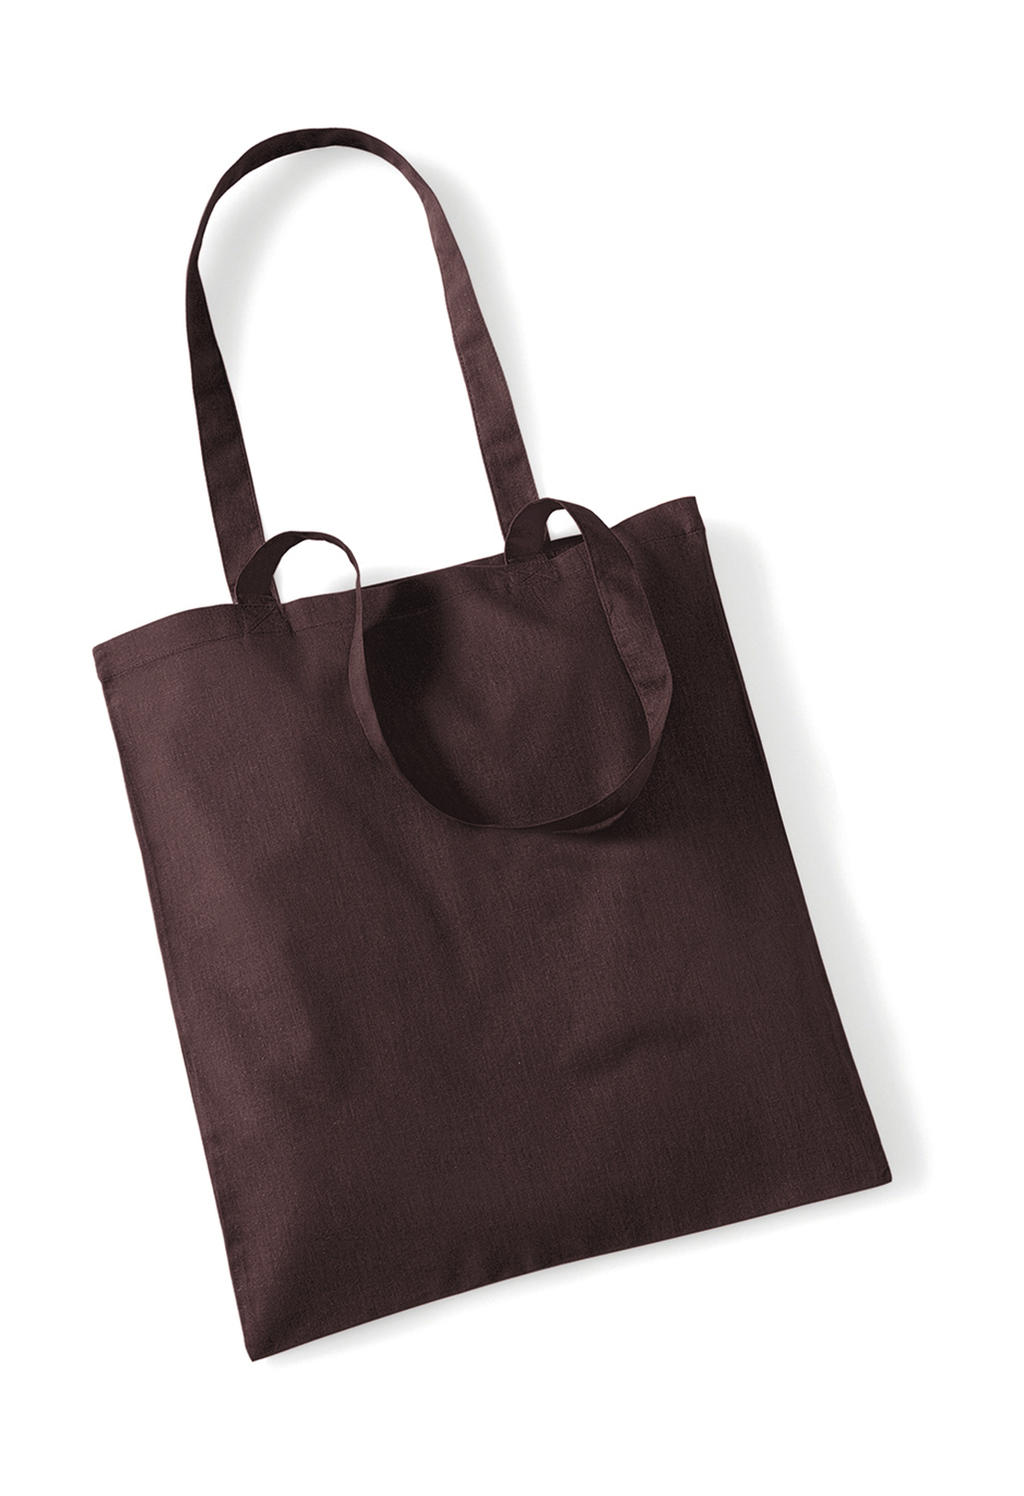  Bag for Life - Long Handles in Farbe Chocolate